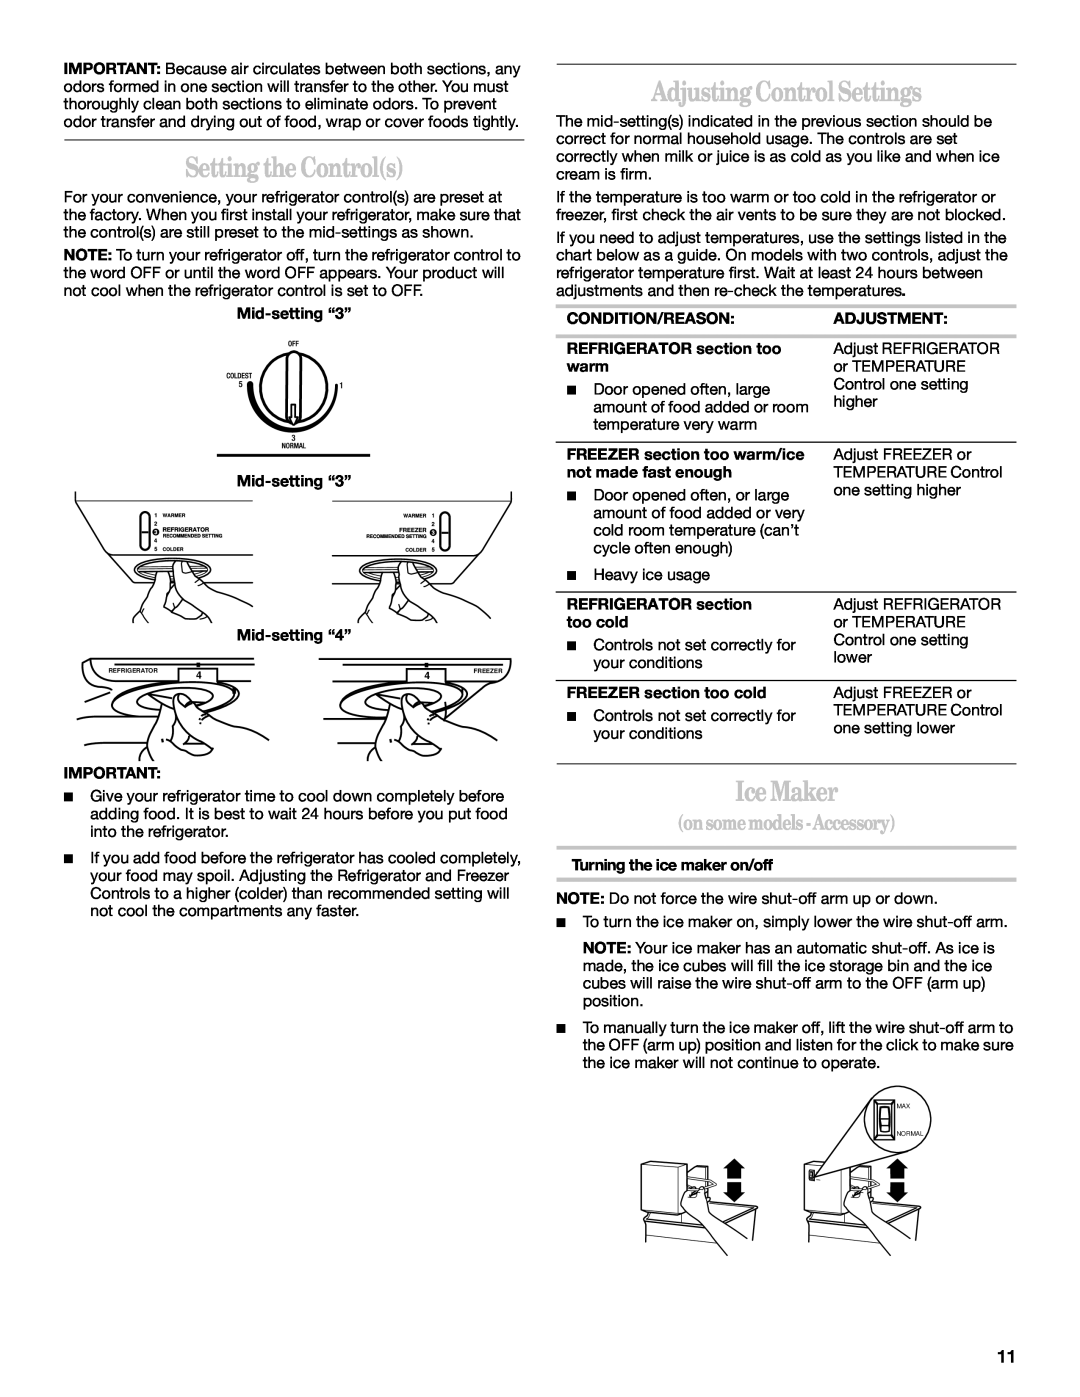 Whirlpool 2218585 manual Setting the Controls, Adjusting Control Settings, Ice Maker, on some models -Accessory 